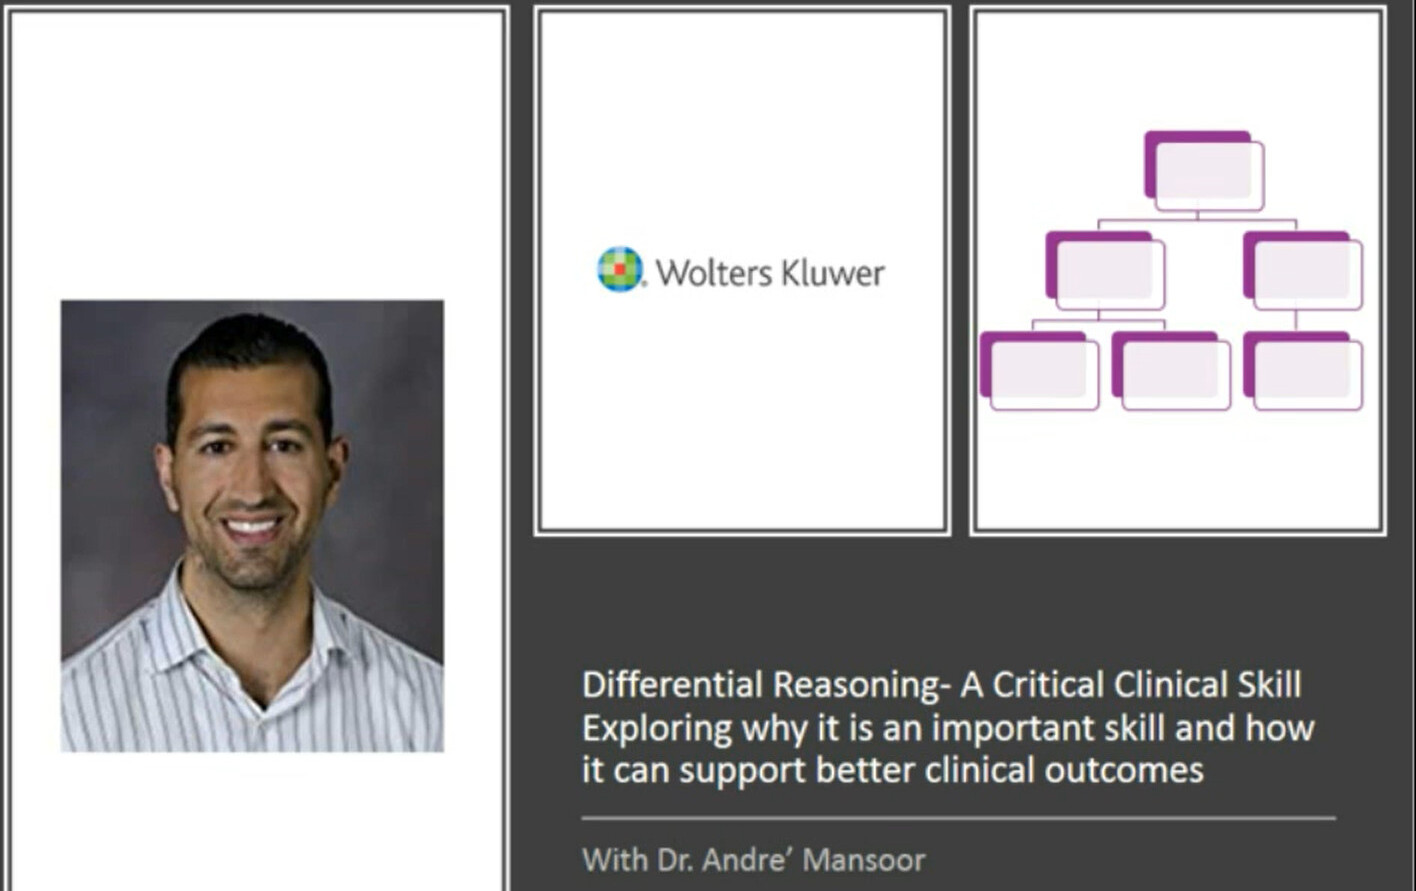 Screenshot of Differential Reasoning: A Critical Clinical Skill video